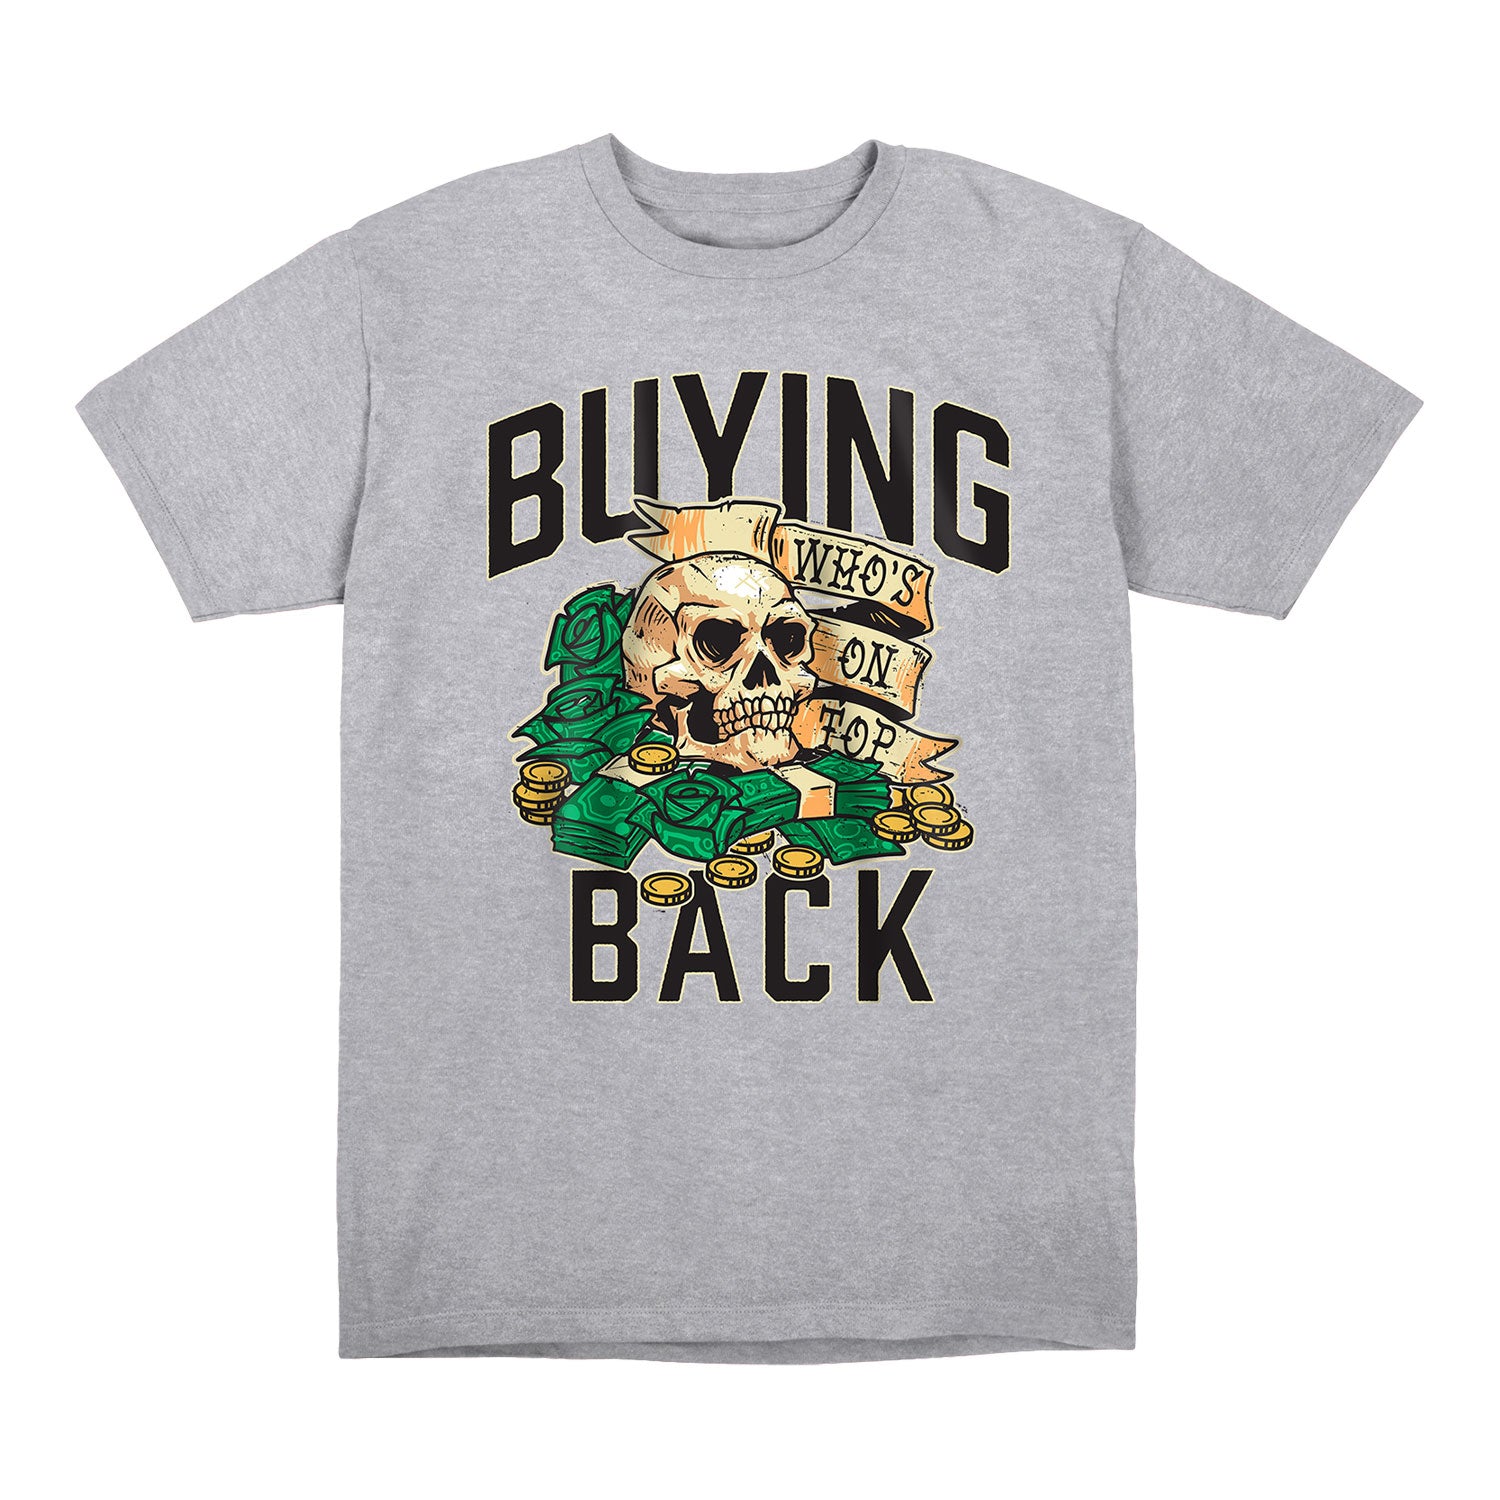 Call of Duty Ash Heather Buying Back T-Shirt - Front View